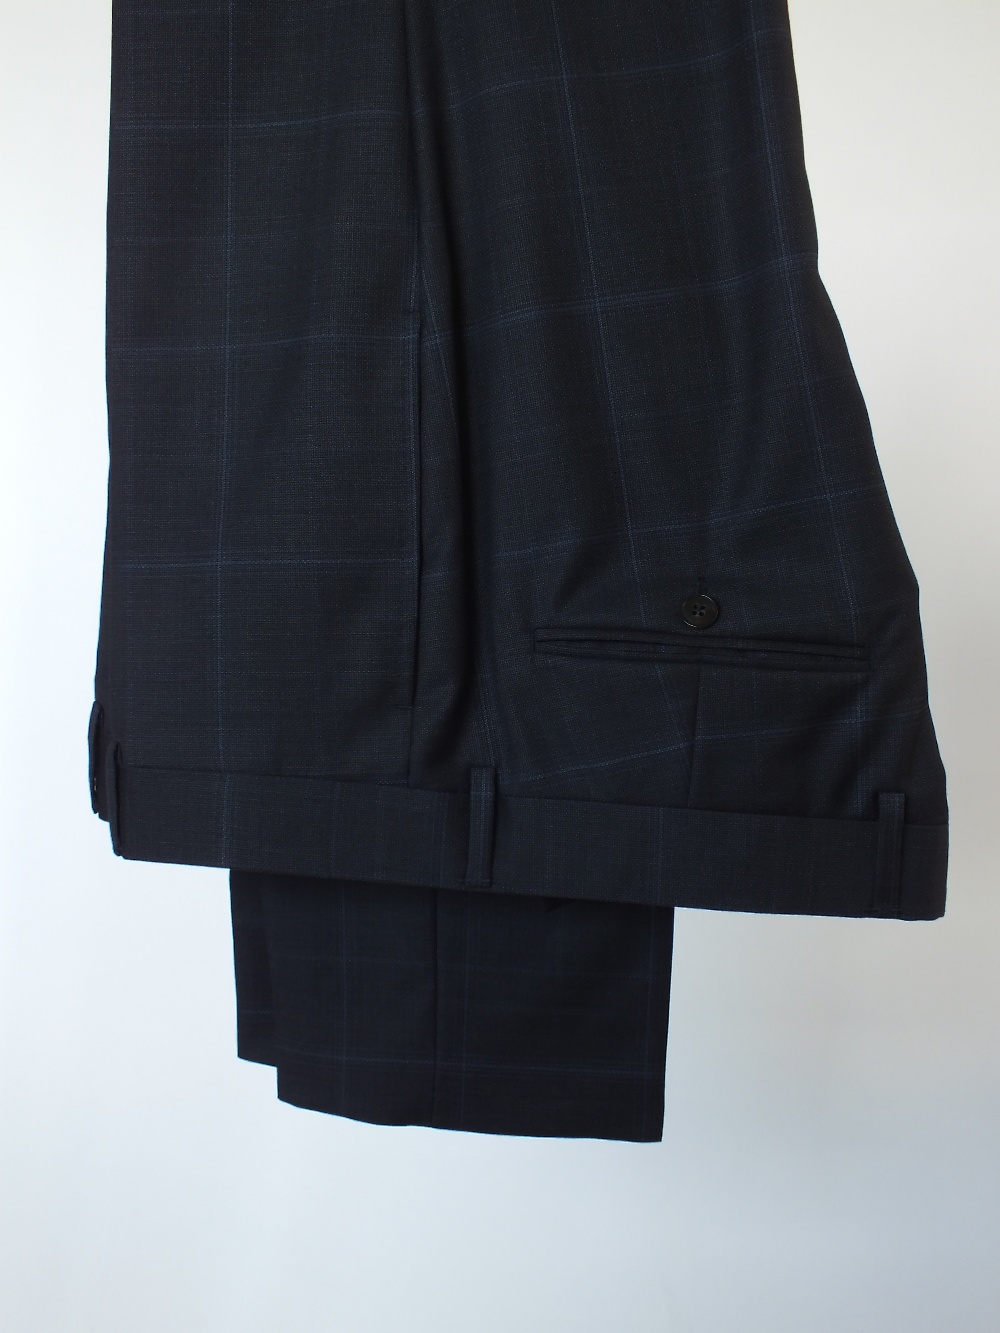 A Gucci suit, navy with blue check, single vent, woven horse bit pattern to lining, 52 regular, 100% - Image 7 of 7